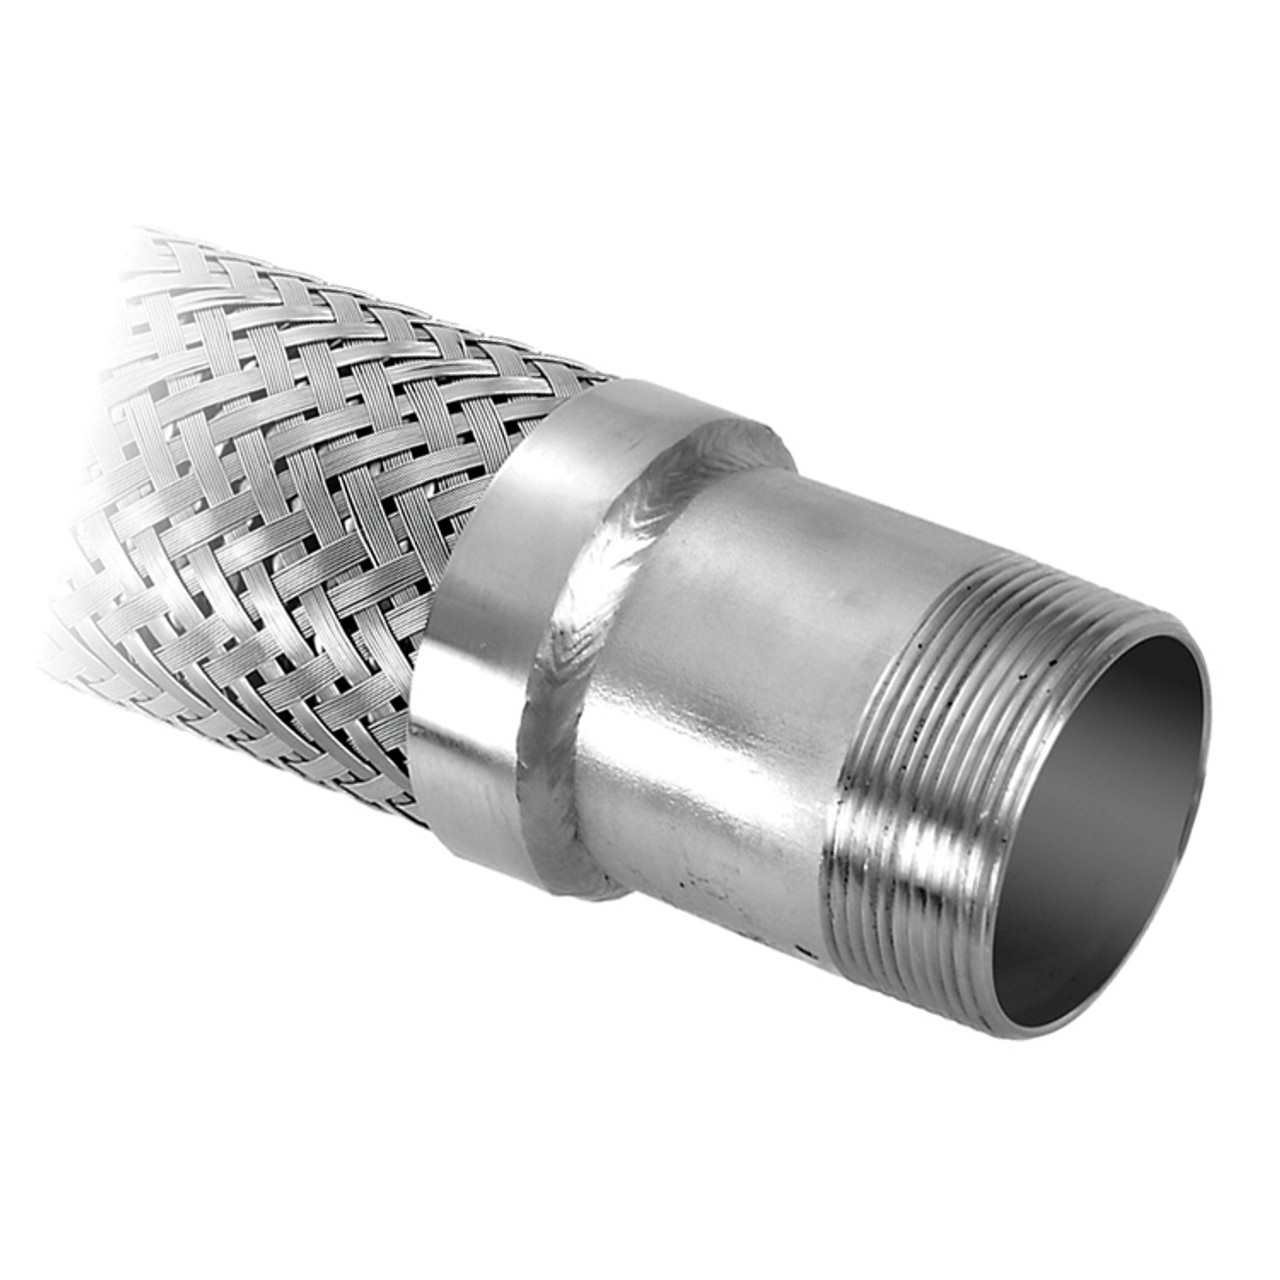 3/4 x 3/4" x 12" Stainless Steel Hose Assembly CSA w/ Male Plain NPT Ends   G521CSA-075MM-12